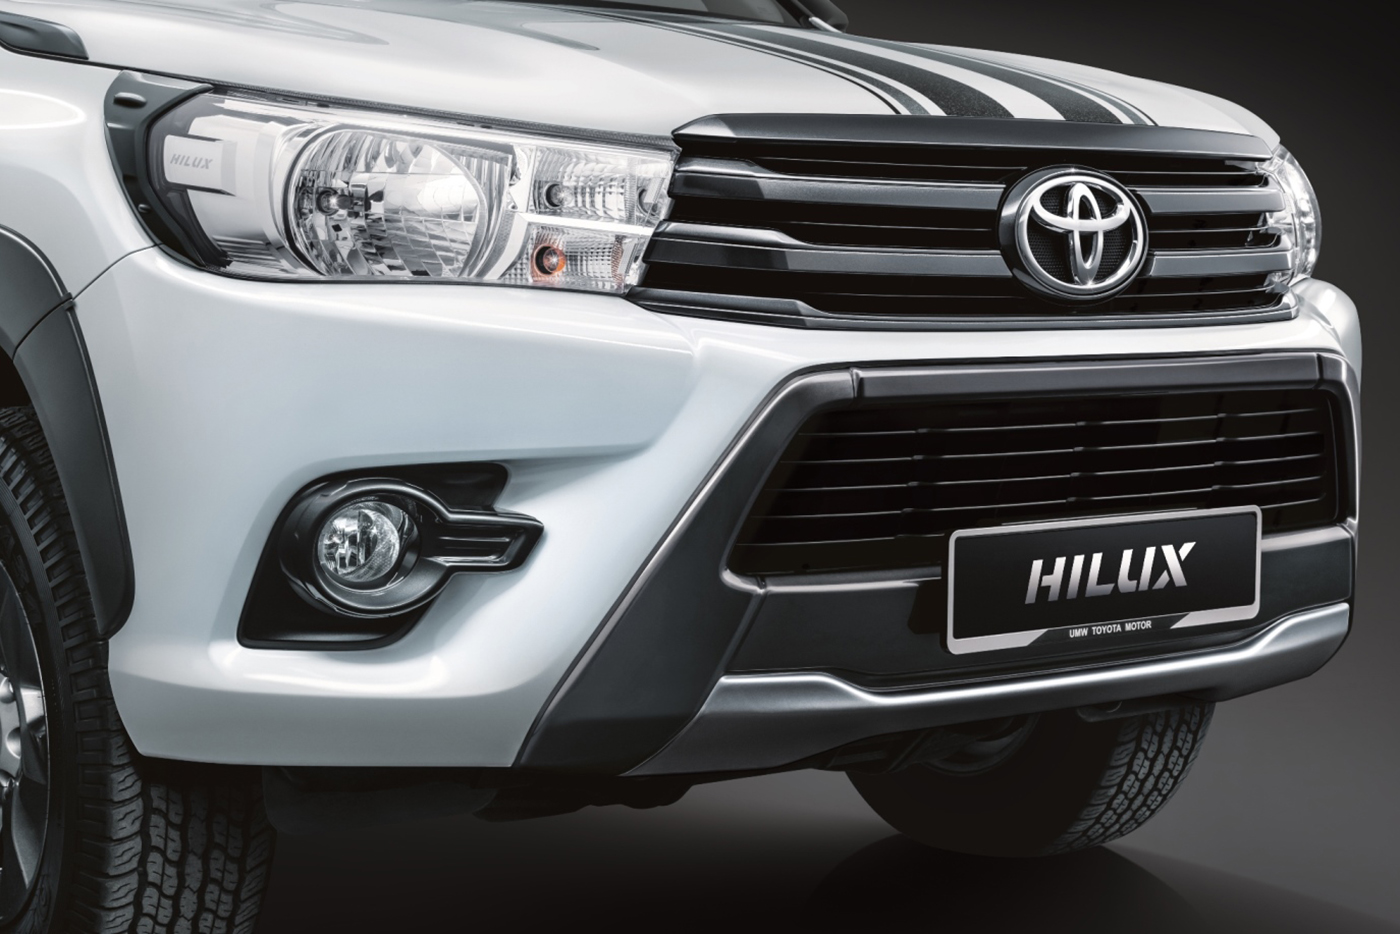 toyota-hilux-24g-limited-edition-3.jpg